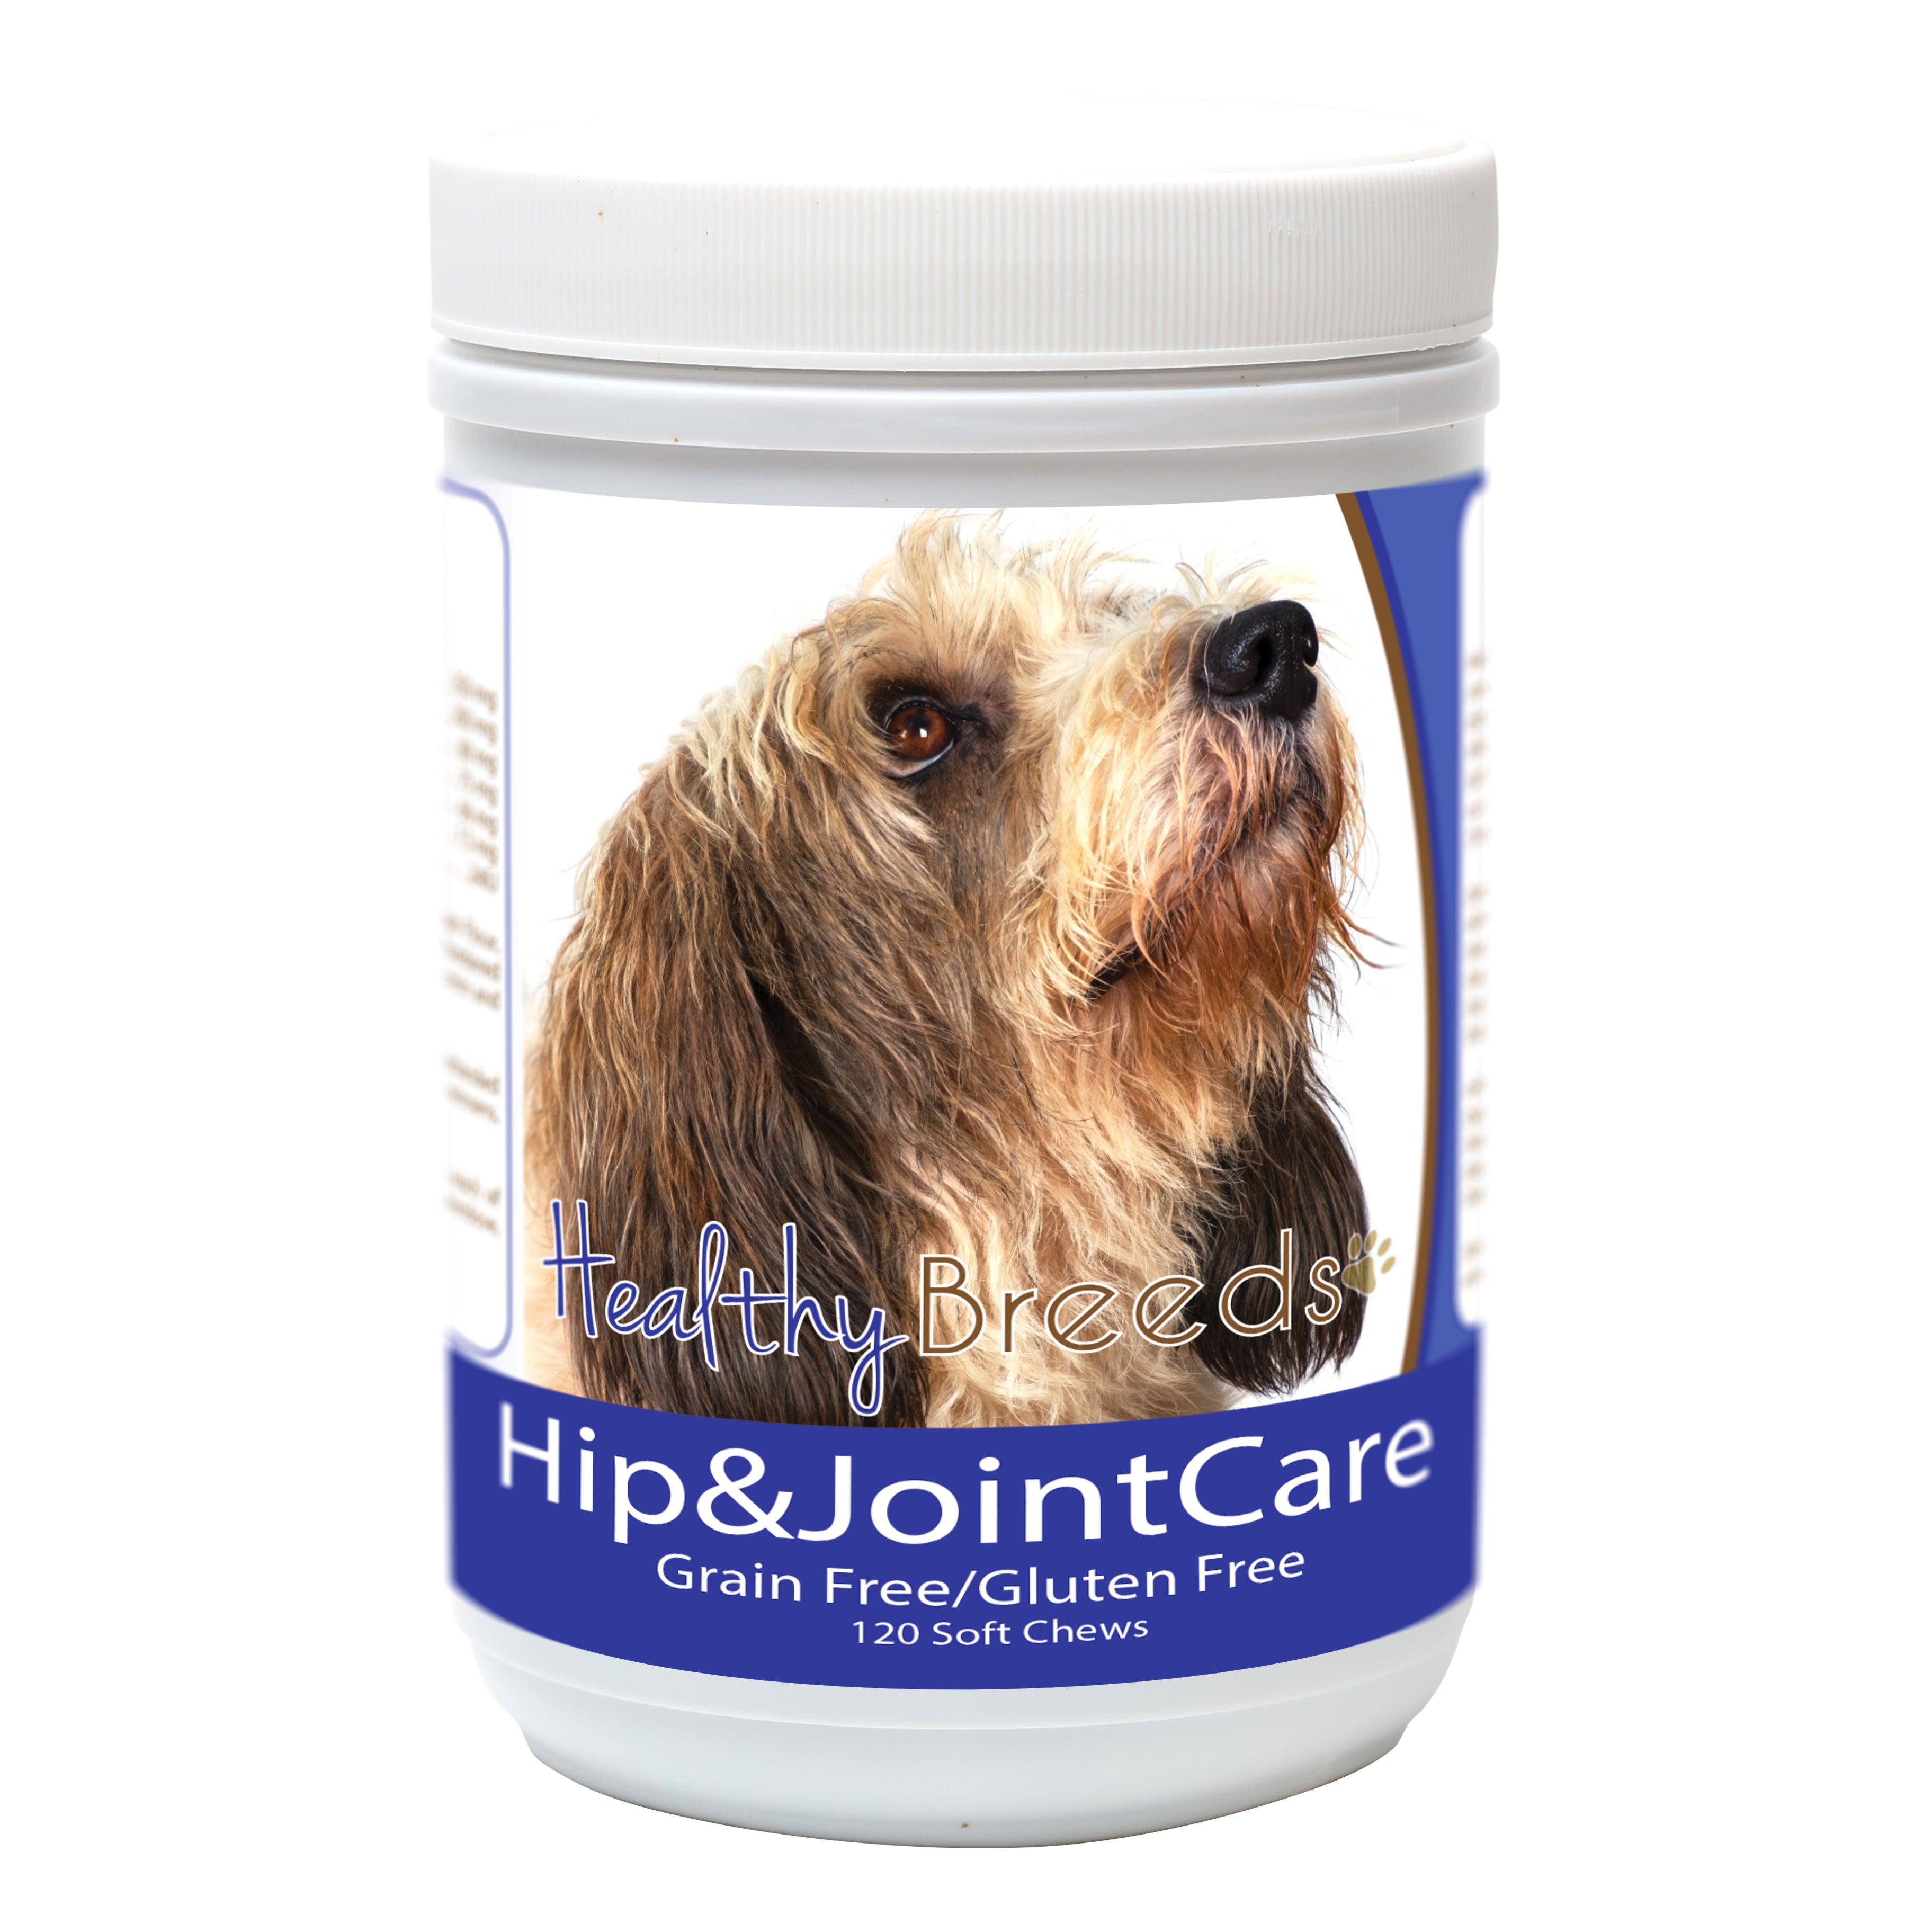 Petits Bassets Griffons Vendeen Hip and Joint Care 120 Count